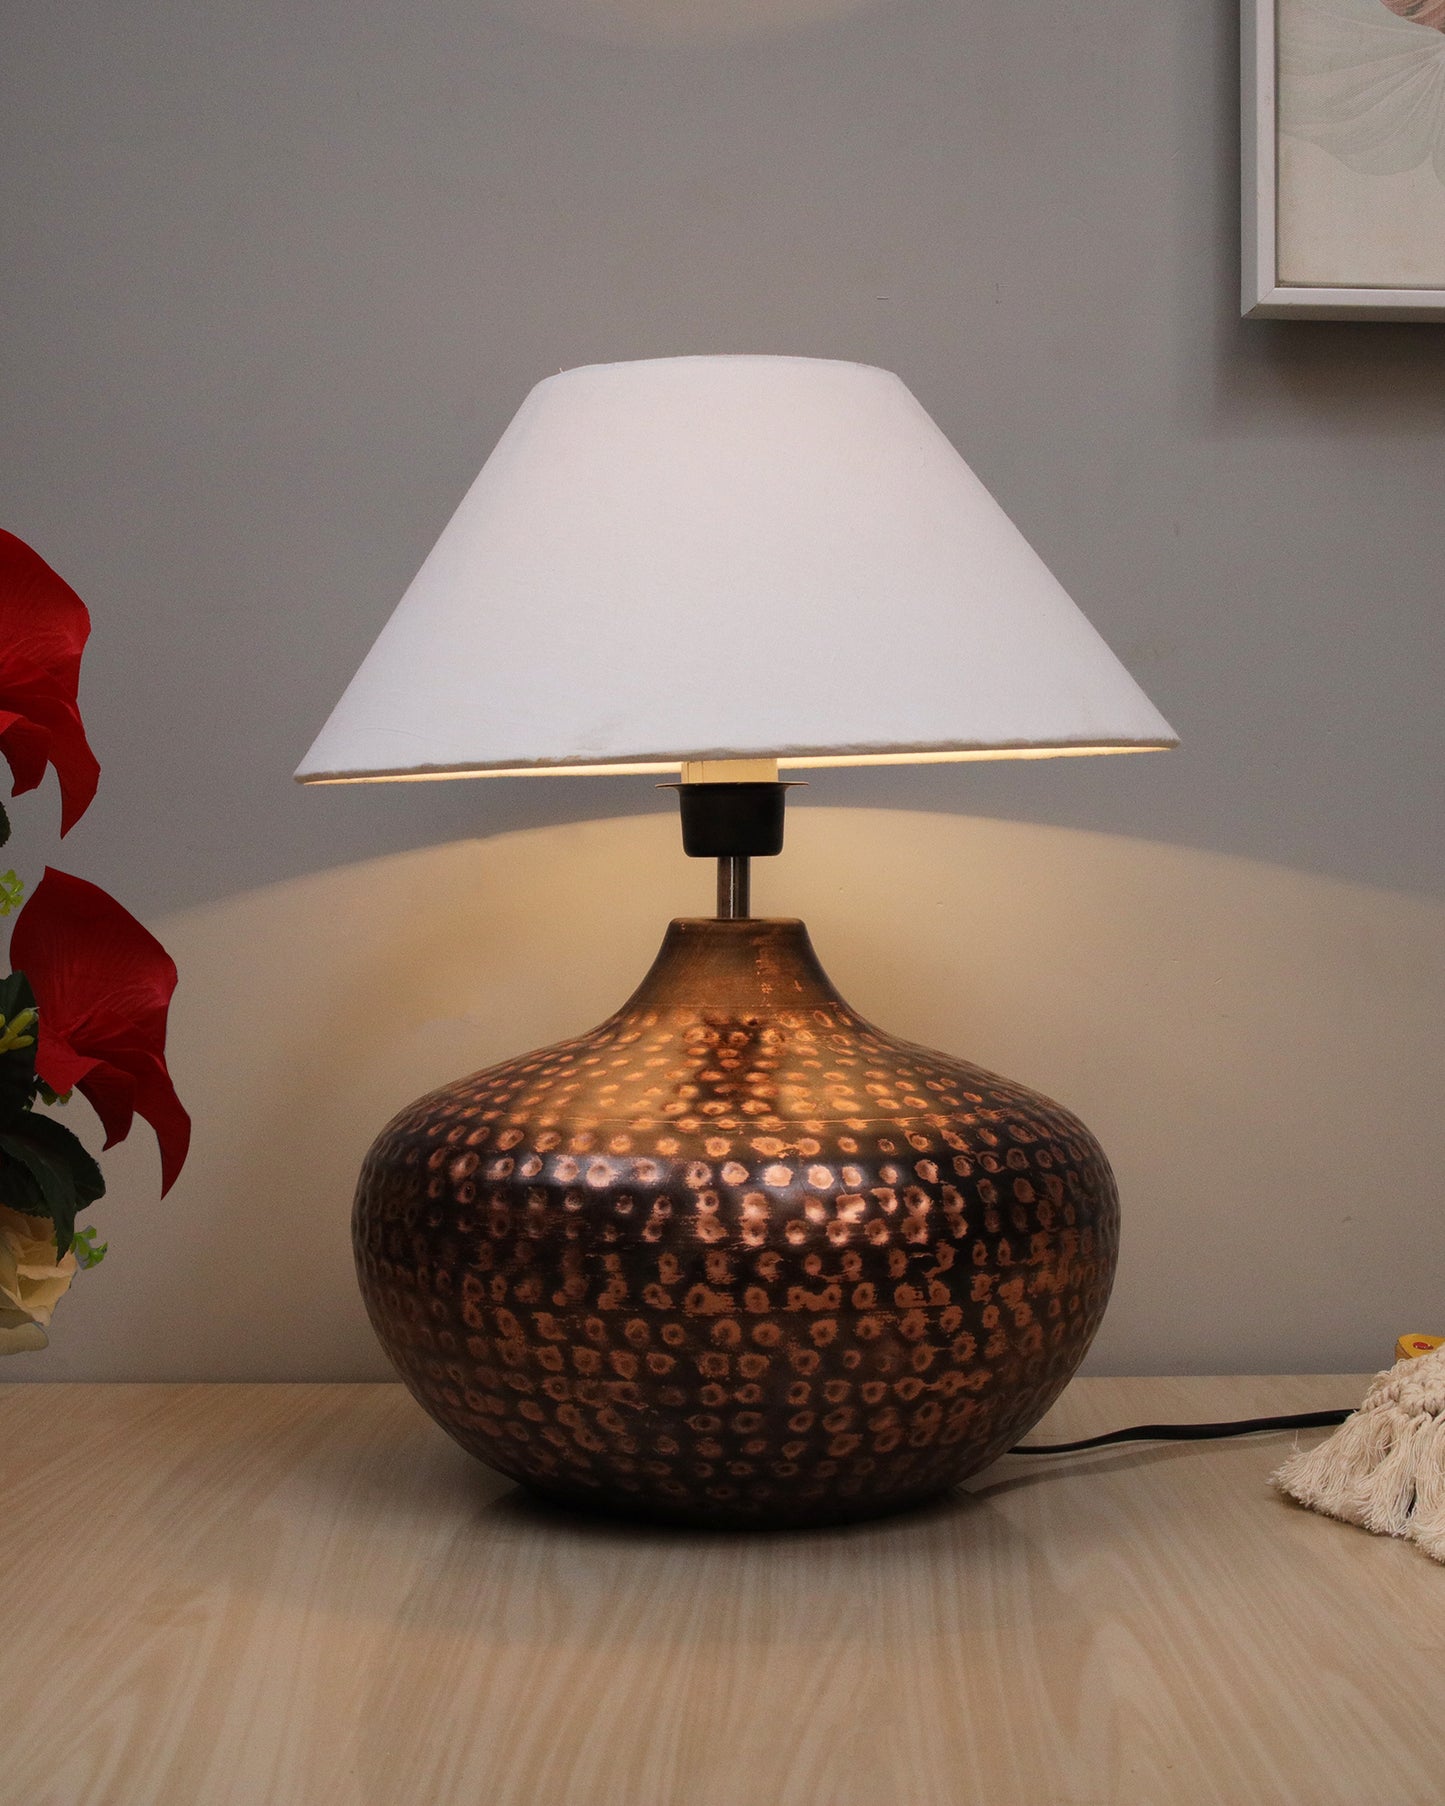 Gourd Metal Antique Hammered Oil-Rubbed Bronze Table Lamp Linen with Jute Shade